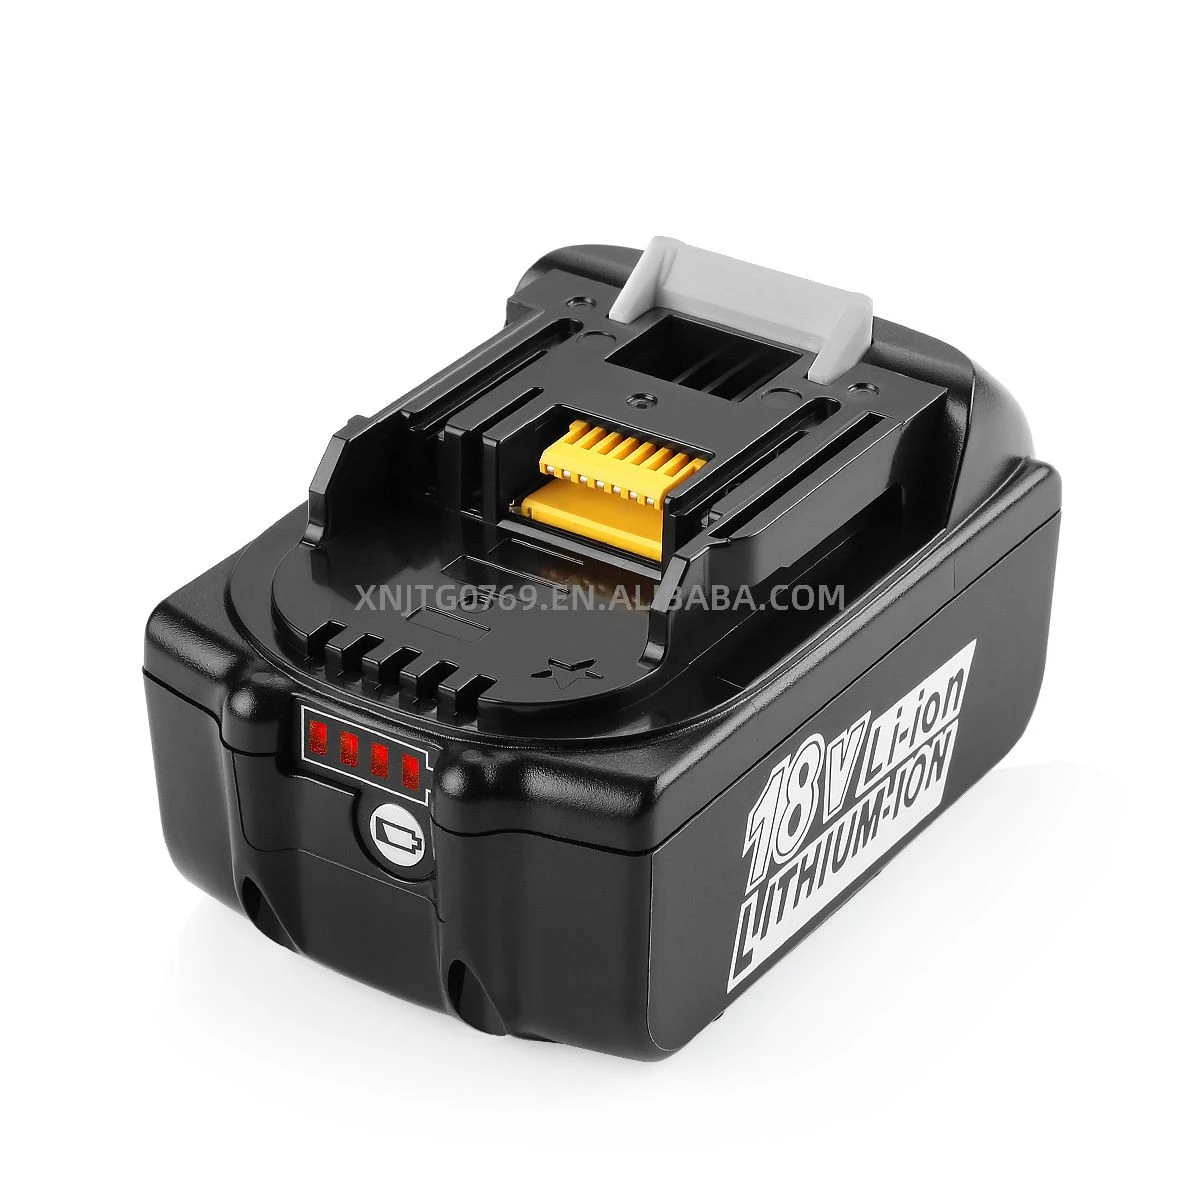 Lithium Ion 18V BL1860 BL1830 Power tool drill batteries Pack Replacement makita battery 6ah